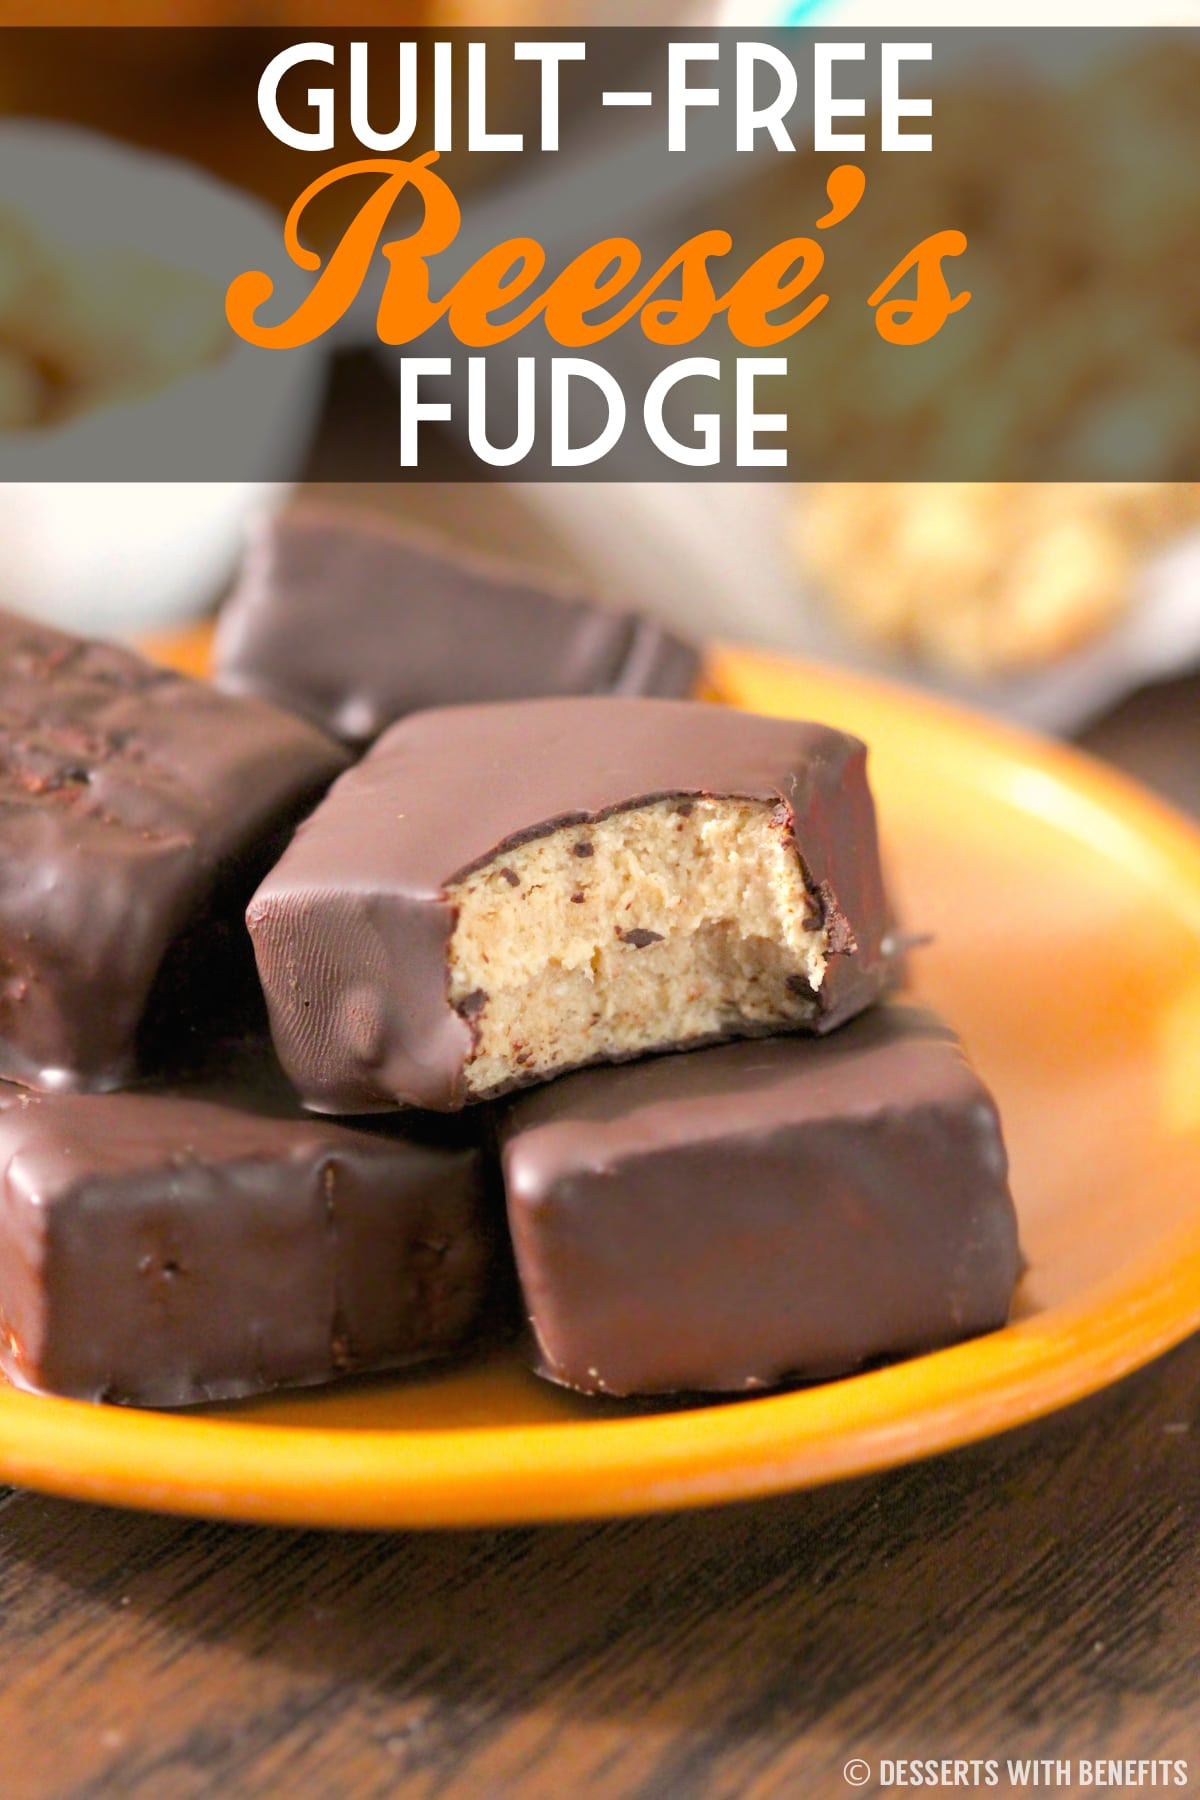 Low Calorie Gluten Free Desserts
 Healthy Reese s Fudge Desserts with Benefits